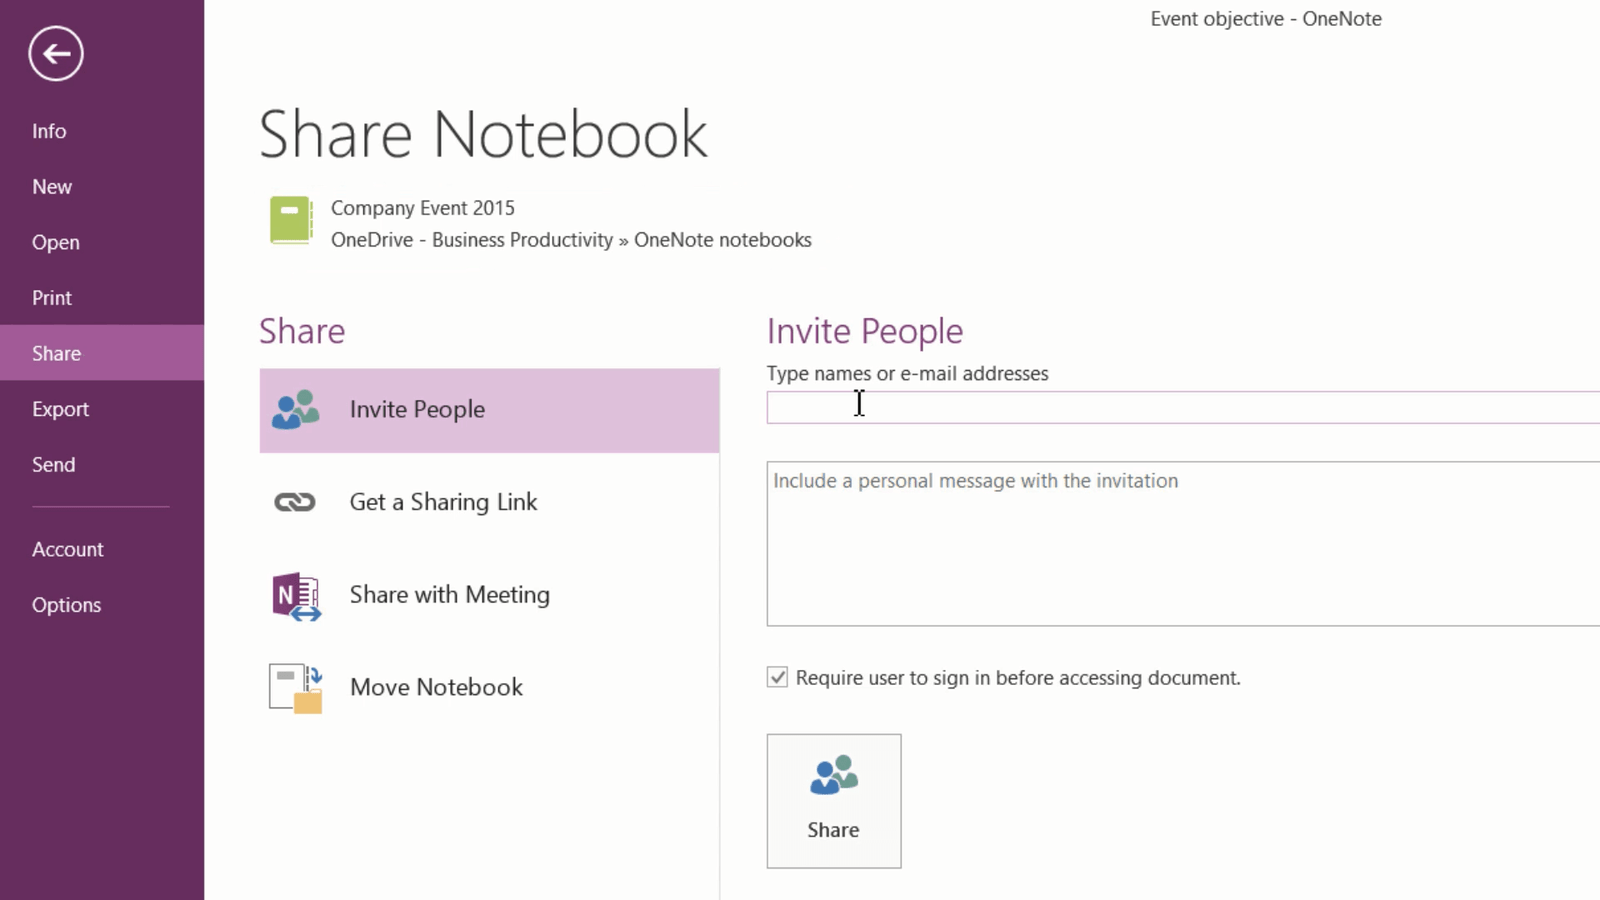 How to share a notebook